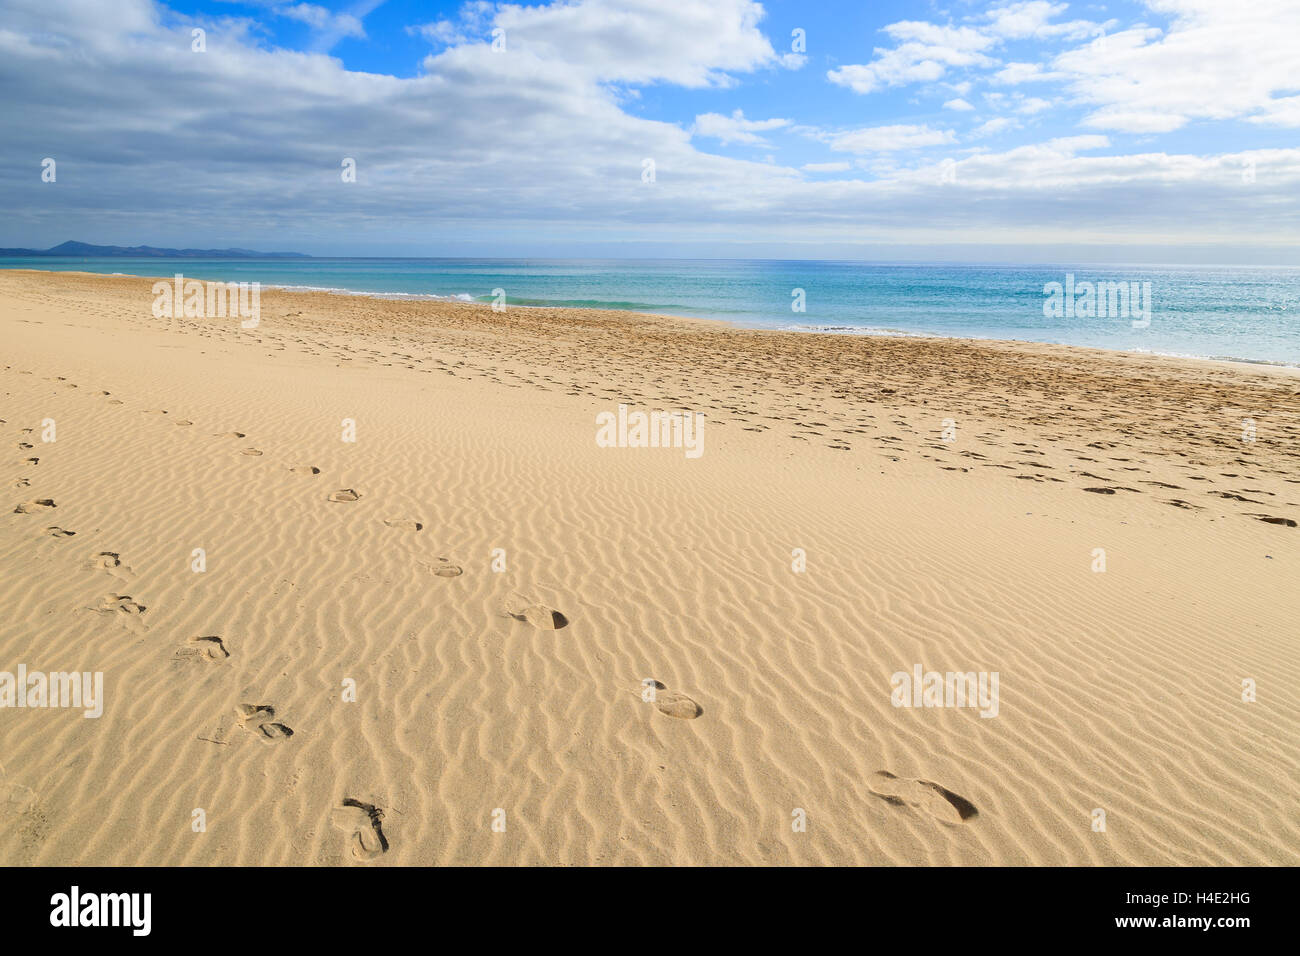 Footprints in sand on and beautiful turquoise sea on Jandia beach, Morro Jable, Fuerteventura, Canary Islands, Spain Stock Photo